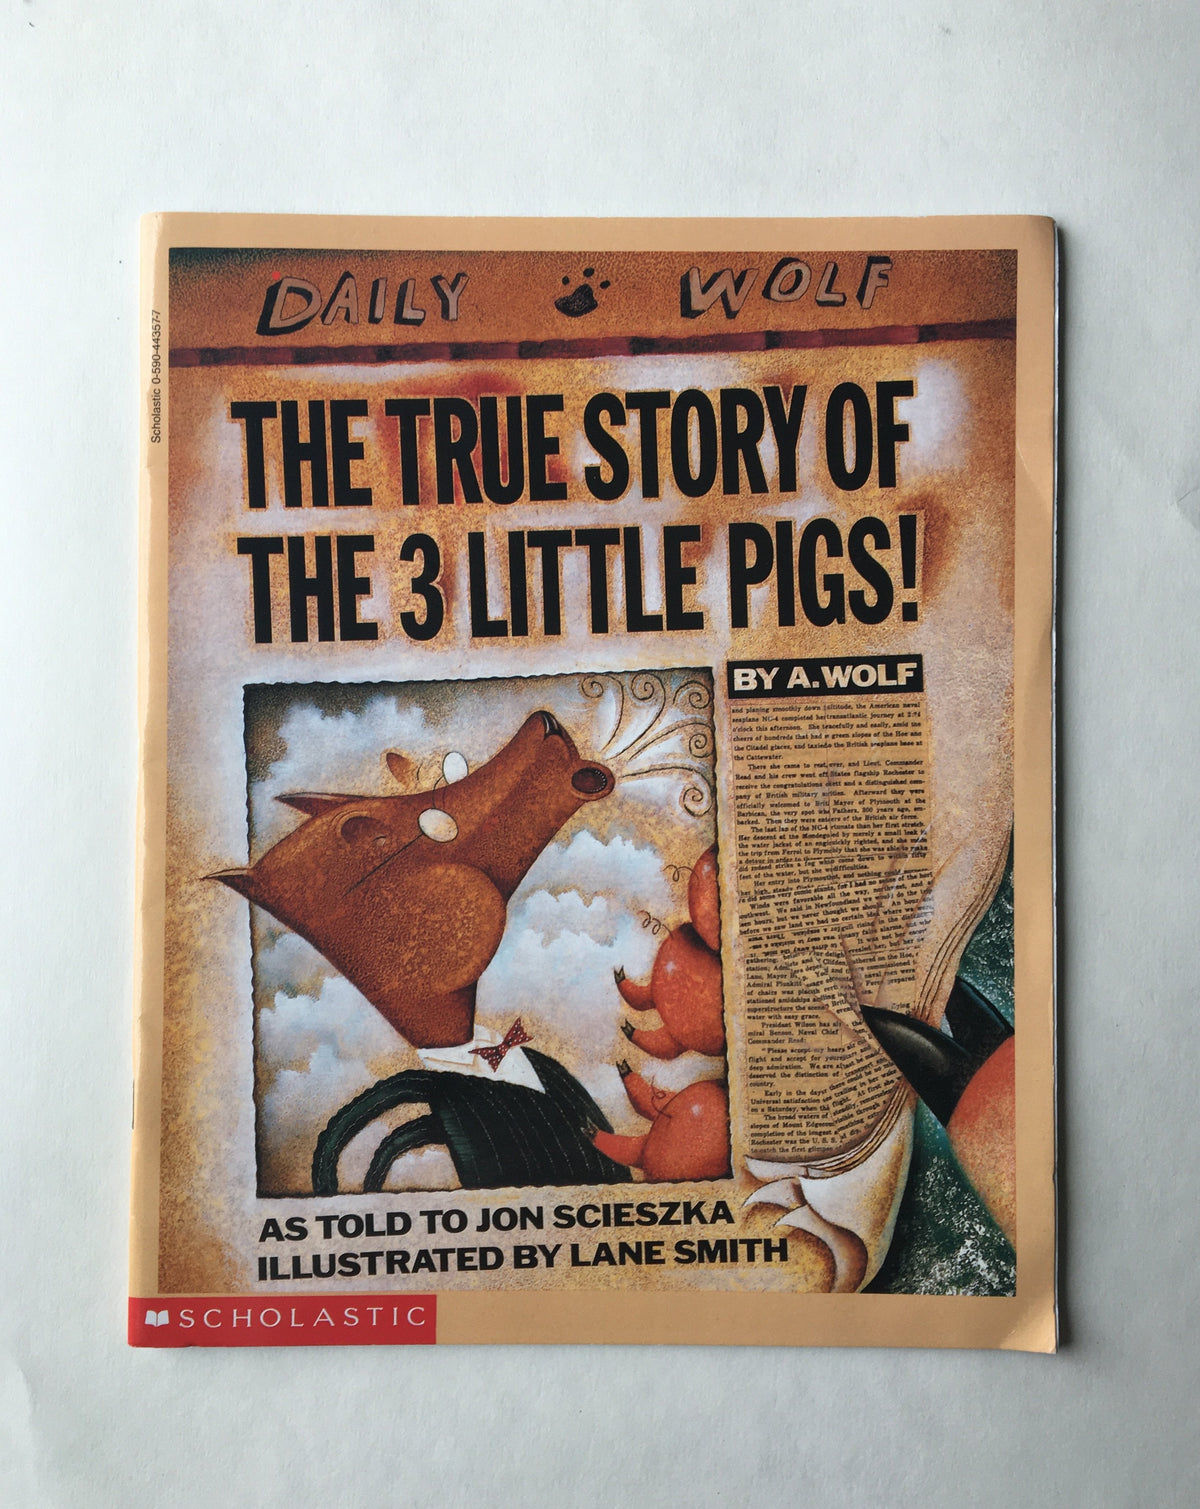 The True Story of the 3 Little Pigs by A. Wolf